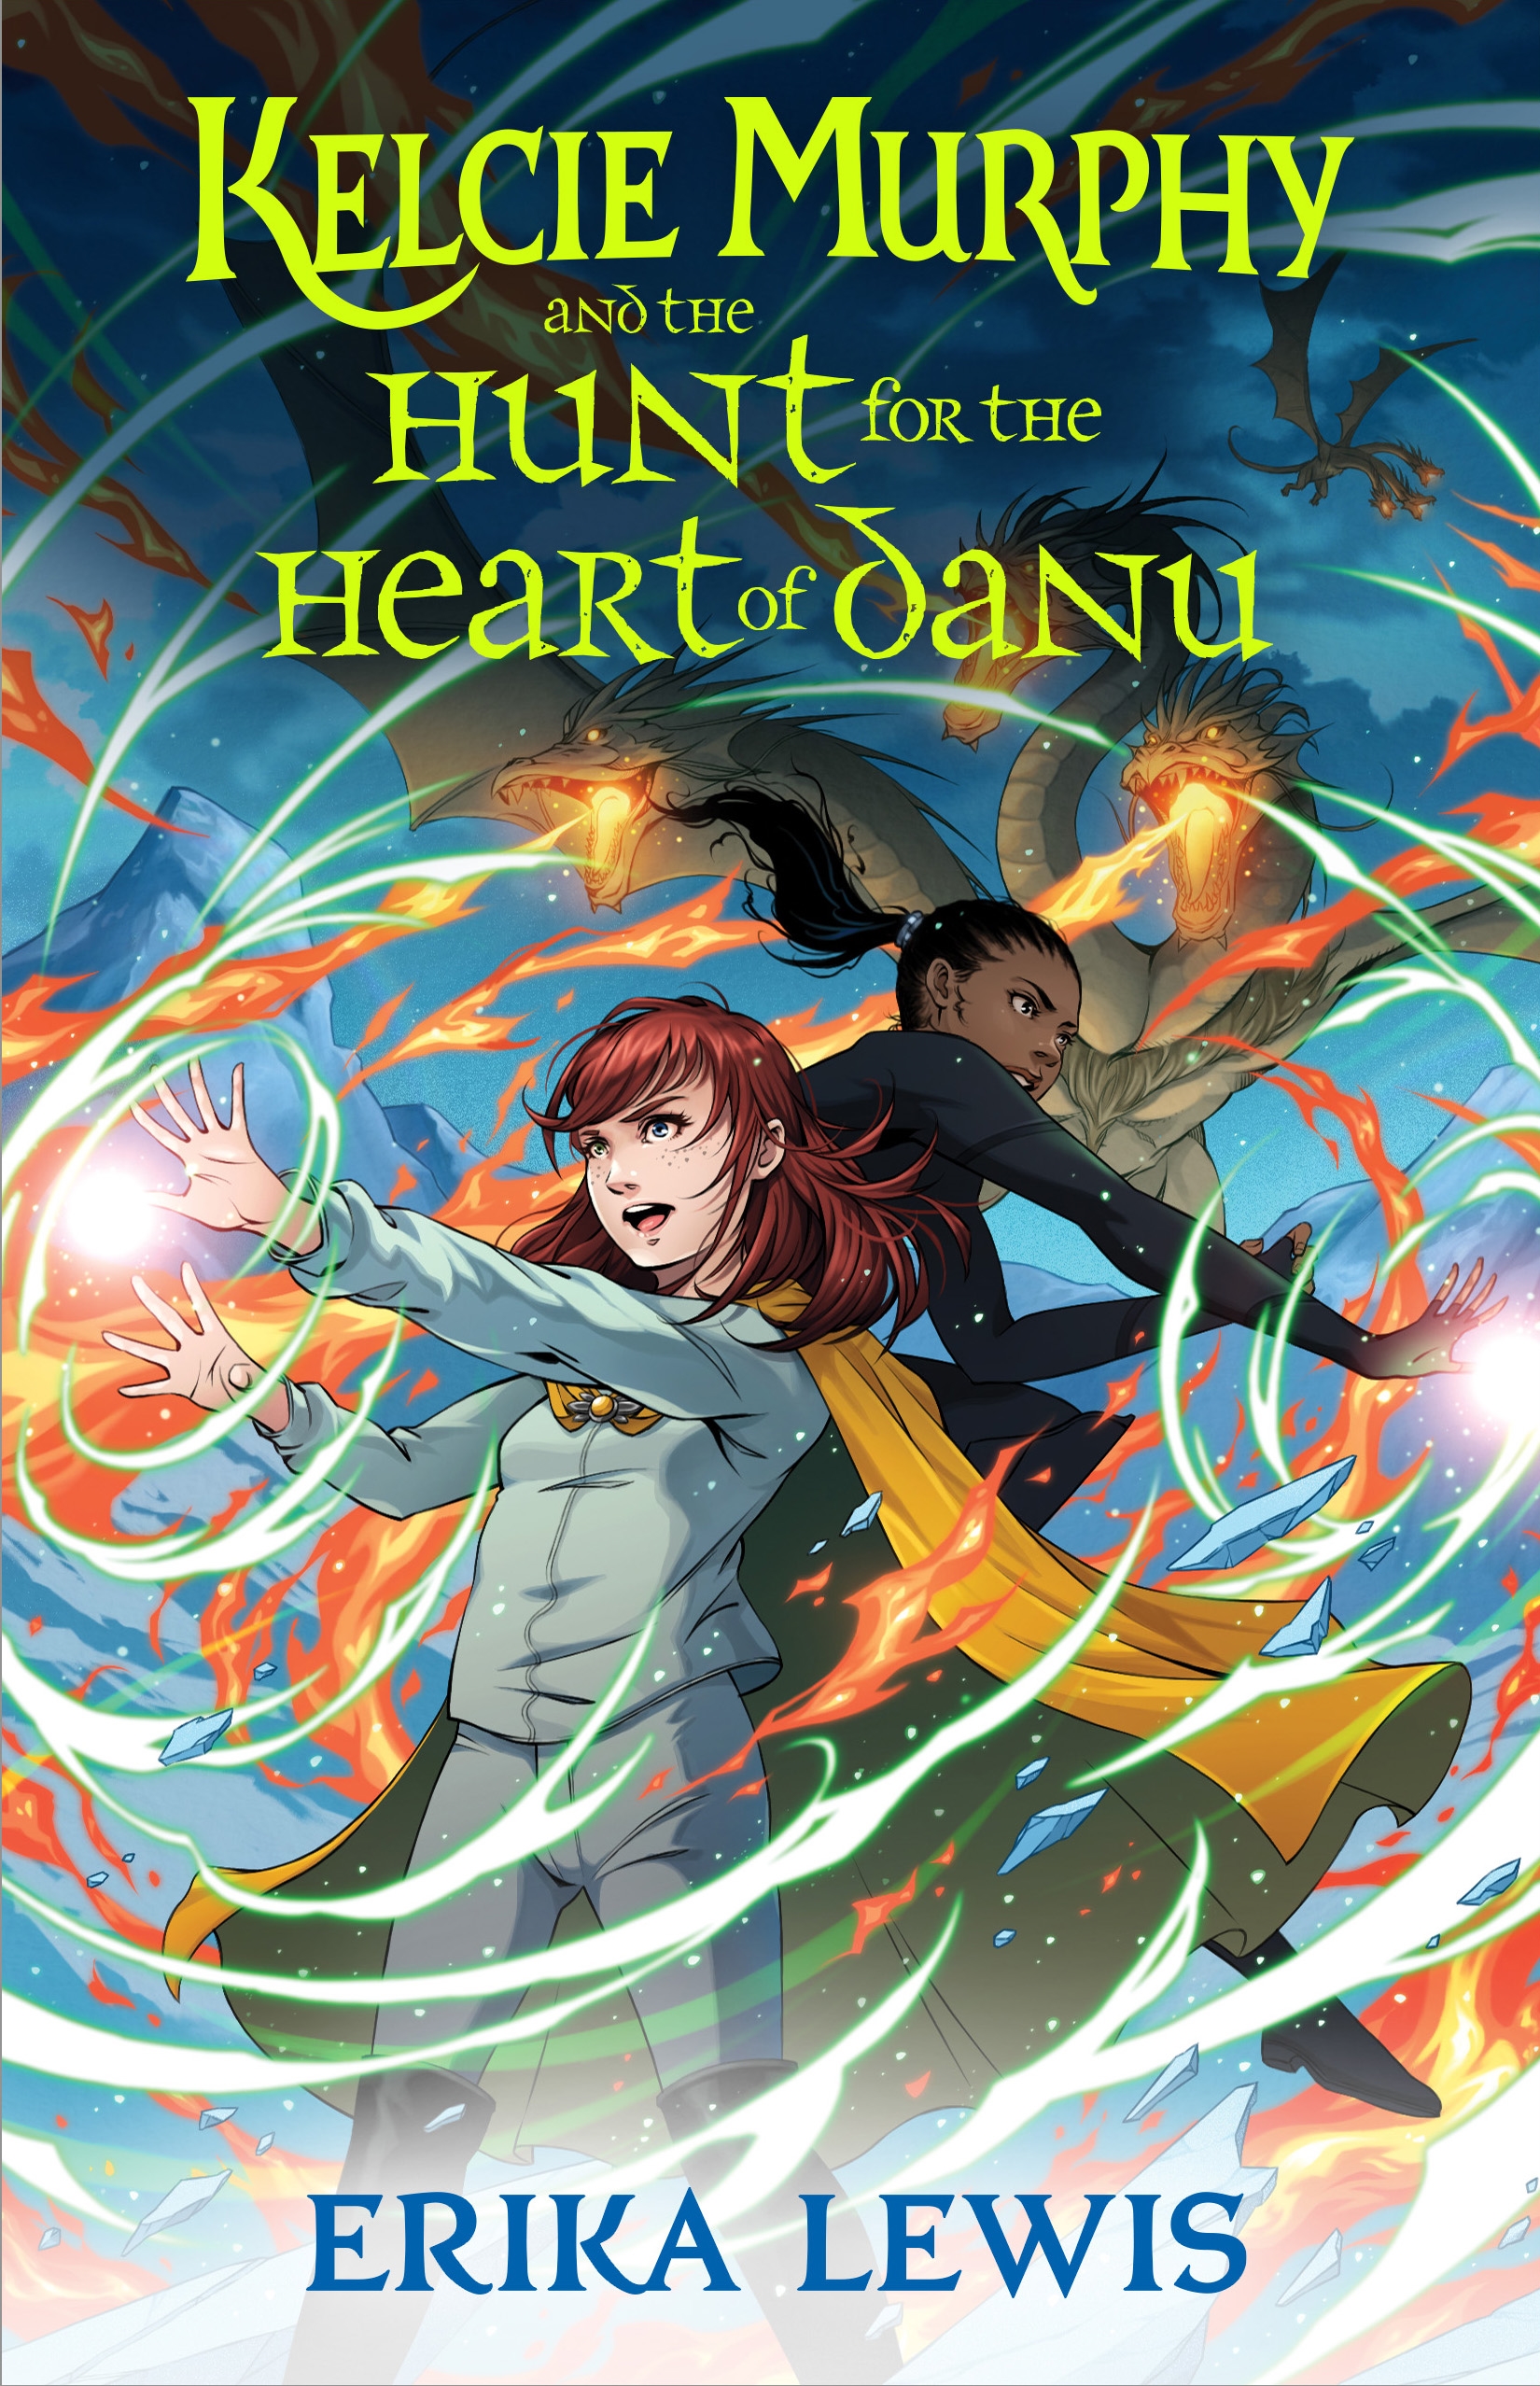 Kelcie Murphy and the Hunt for the Heart of Danu by Erika Lewis, Bess Cozby